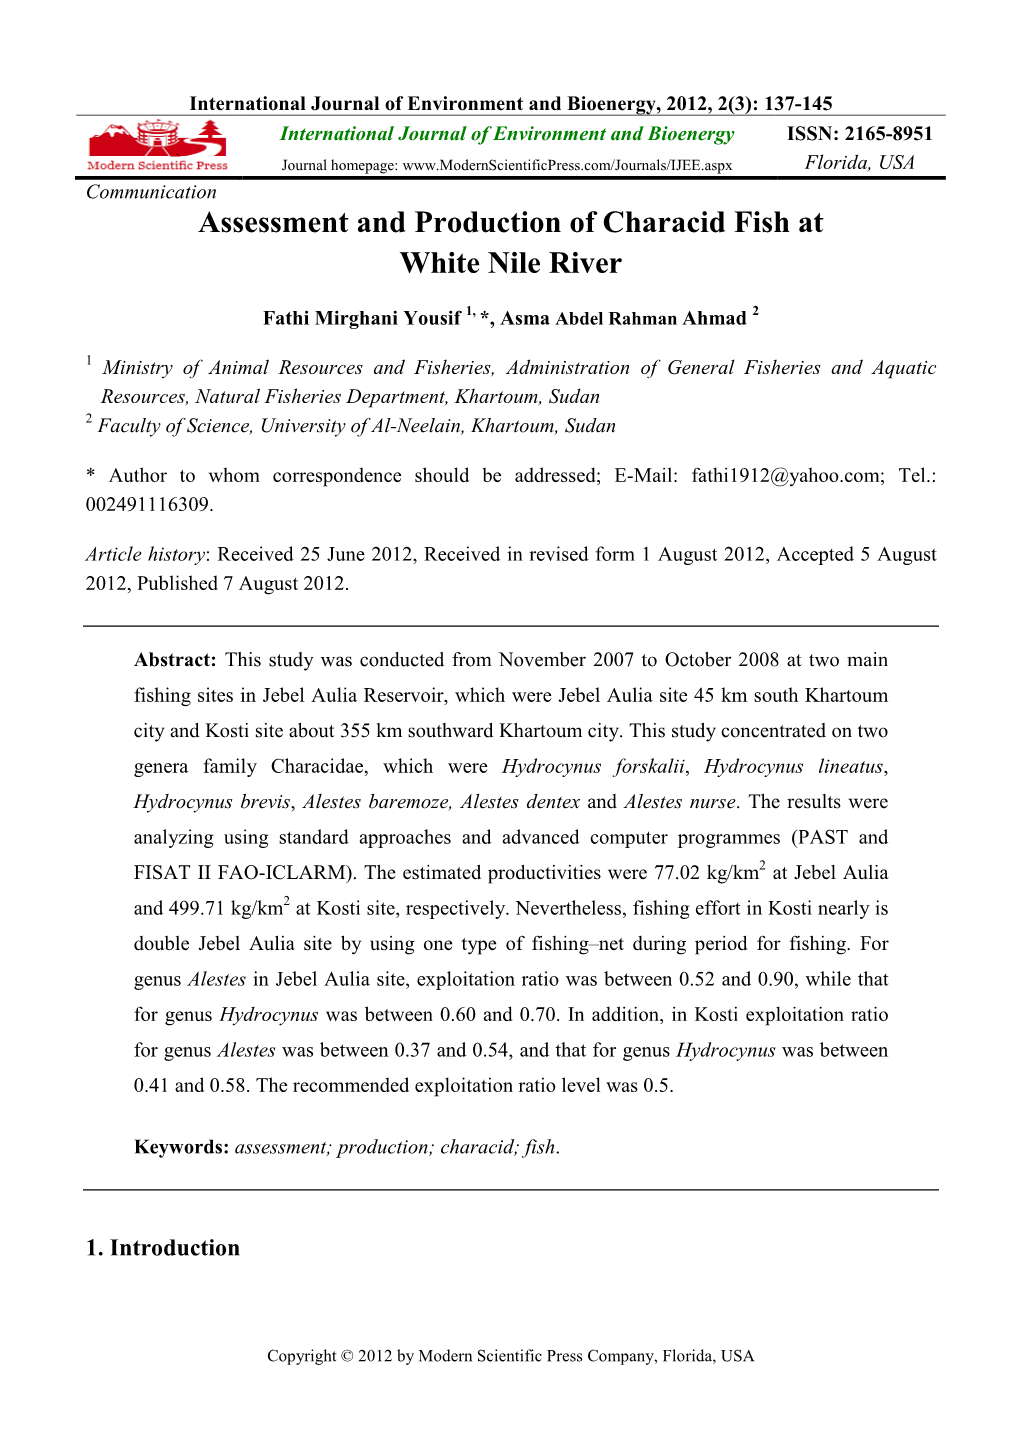 Assessment and Production of Characid Fish at White Nile River